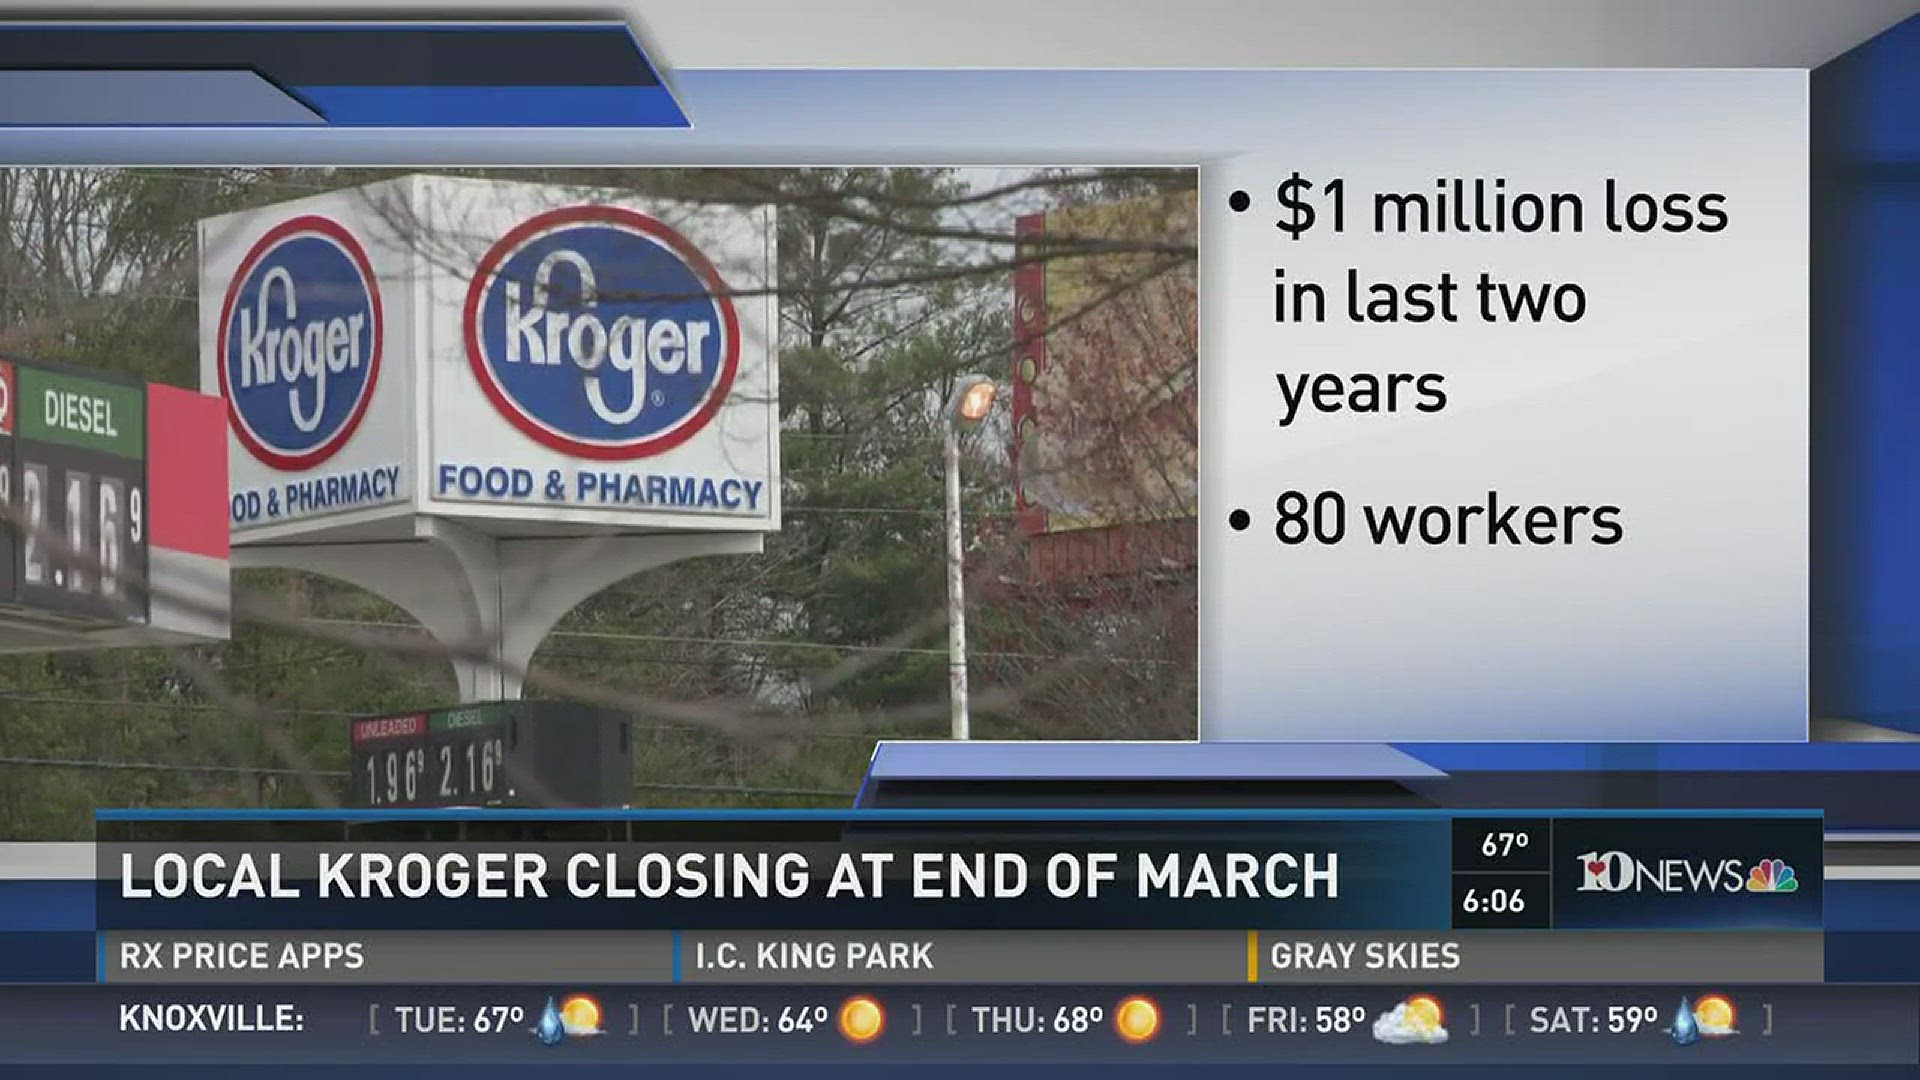 Woman Walks Into Kroger and Works. She's Not An Employee